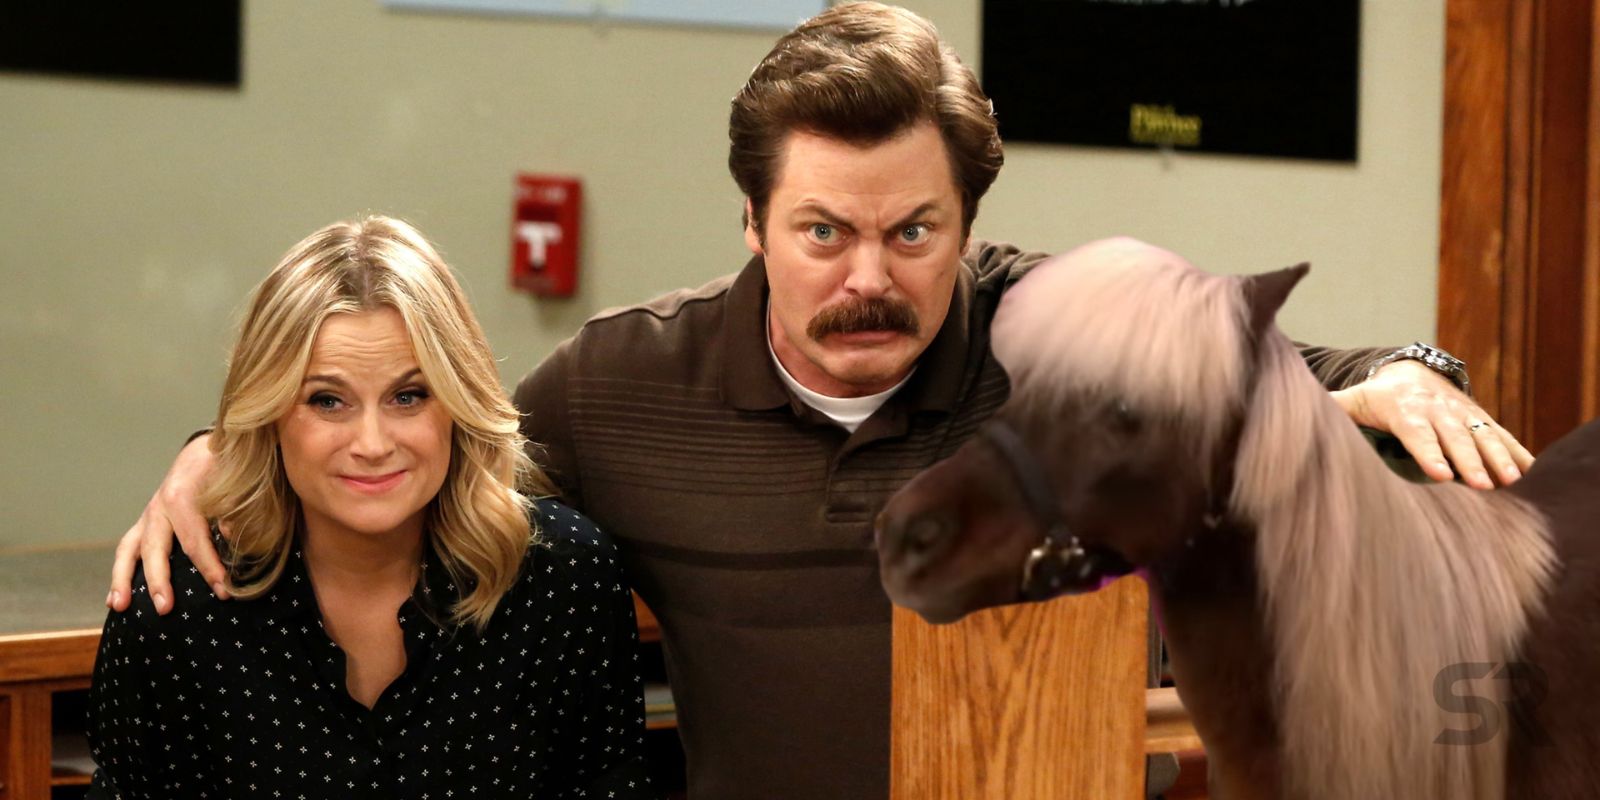 Leslie and Ron with Lil Sebastian Parks and Recreation